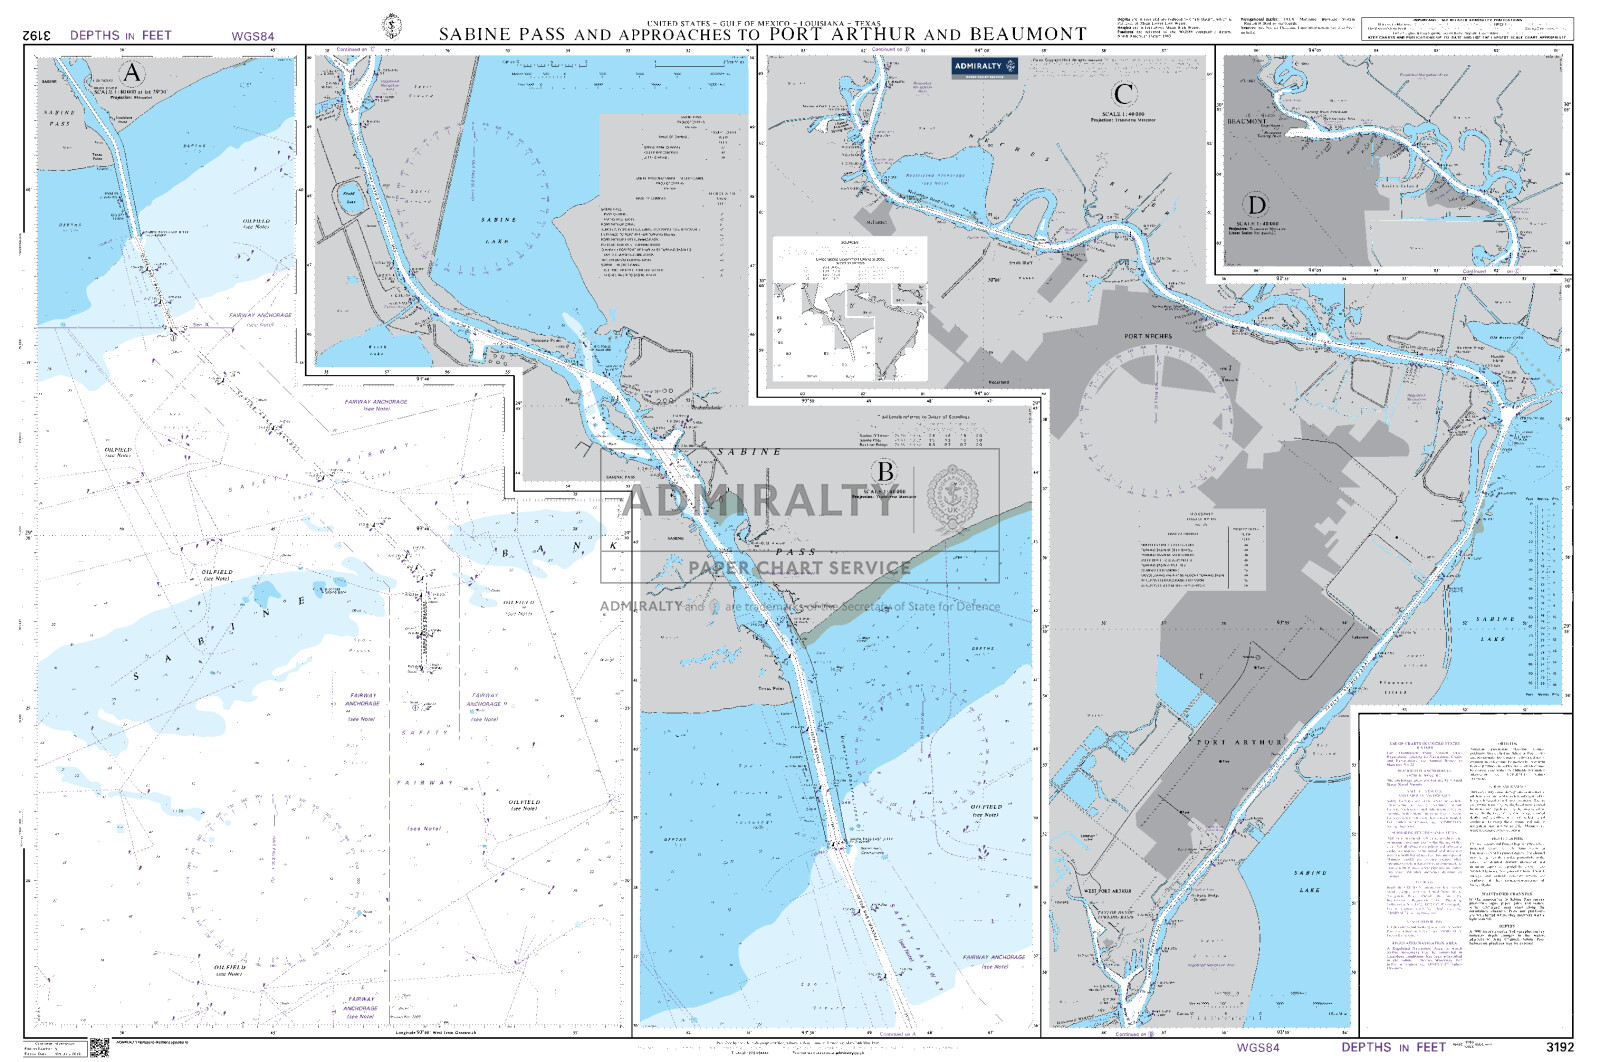 Sabine Pass and Approaches to Port Arthur and Beaumont. UKHO3192